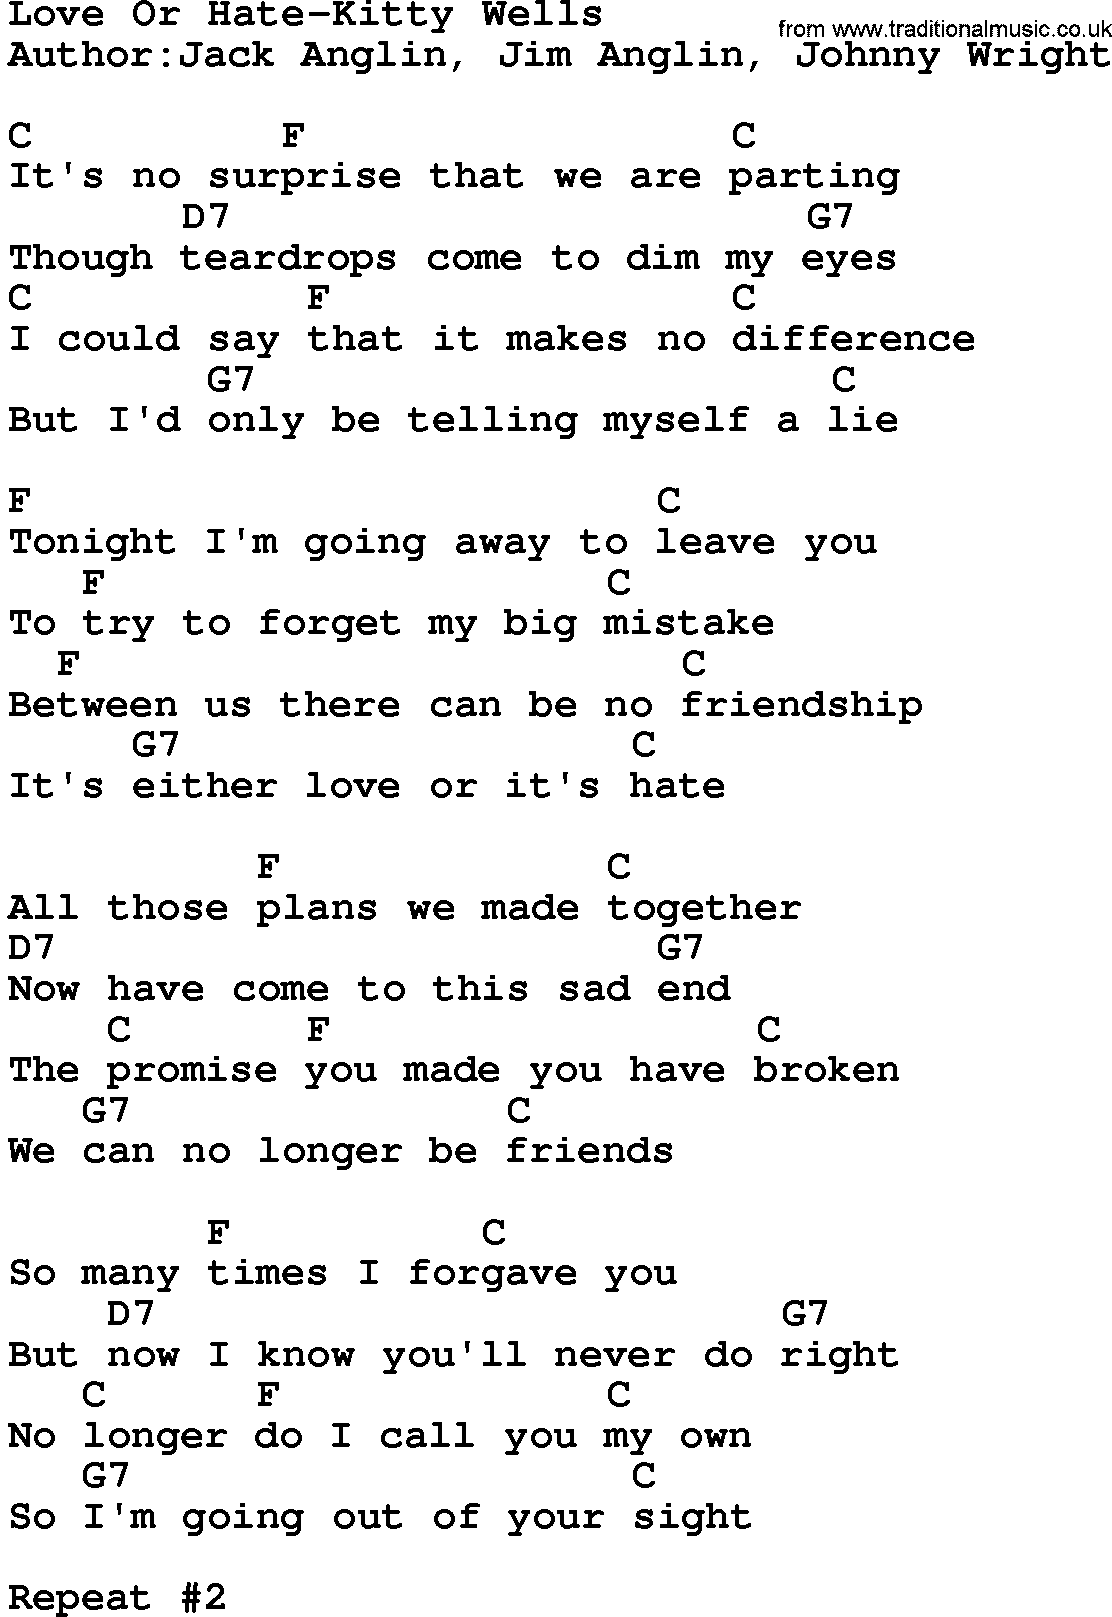 Country music song: Love Or Hate-Kitty Wells lyrics and chords